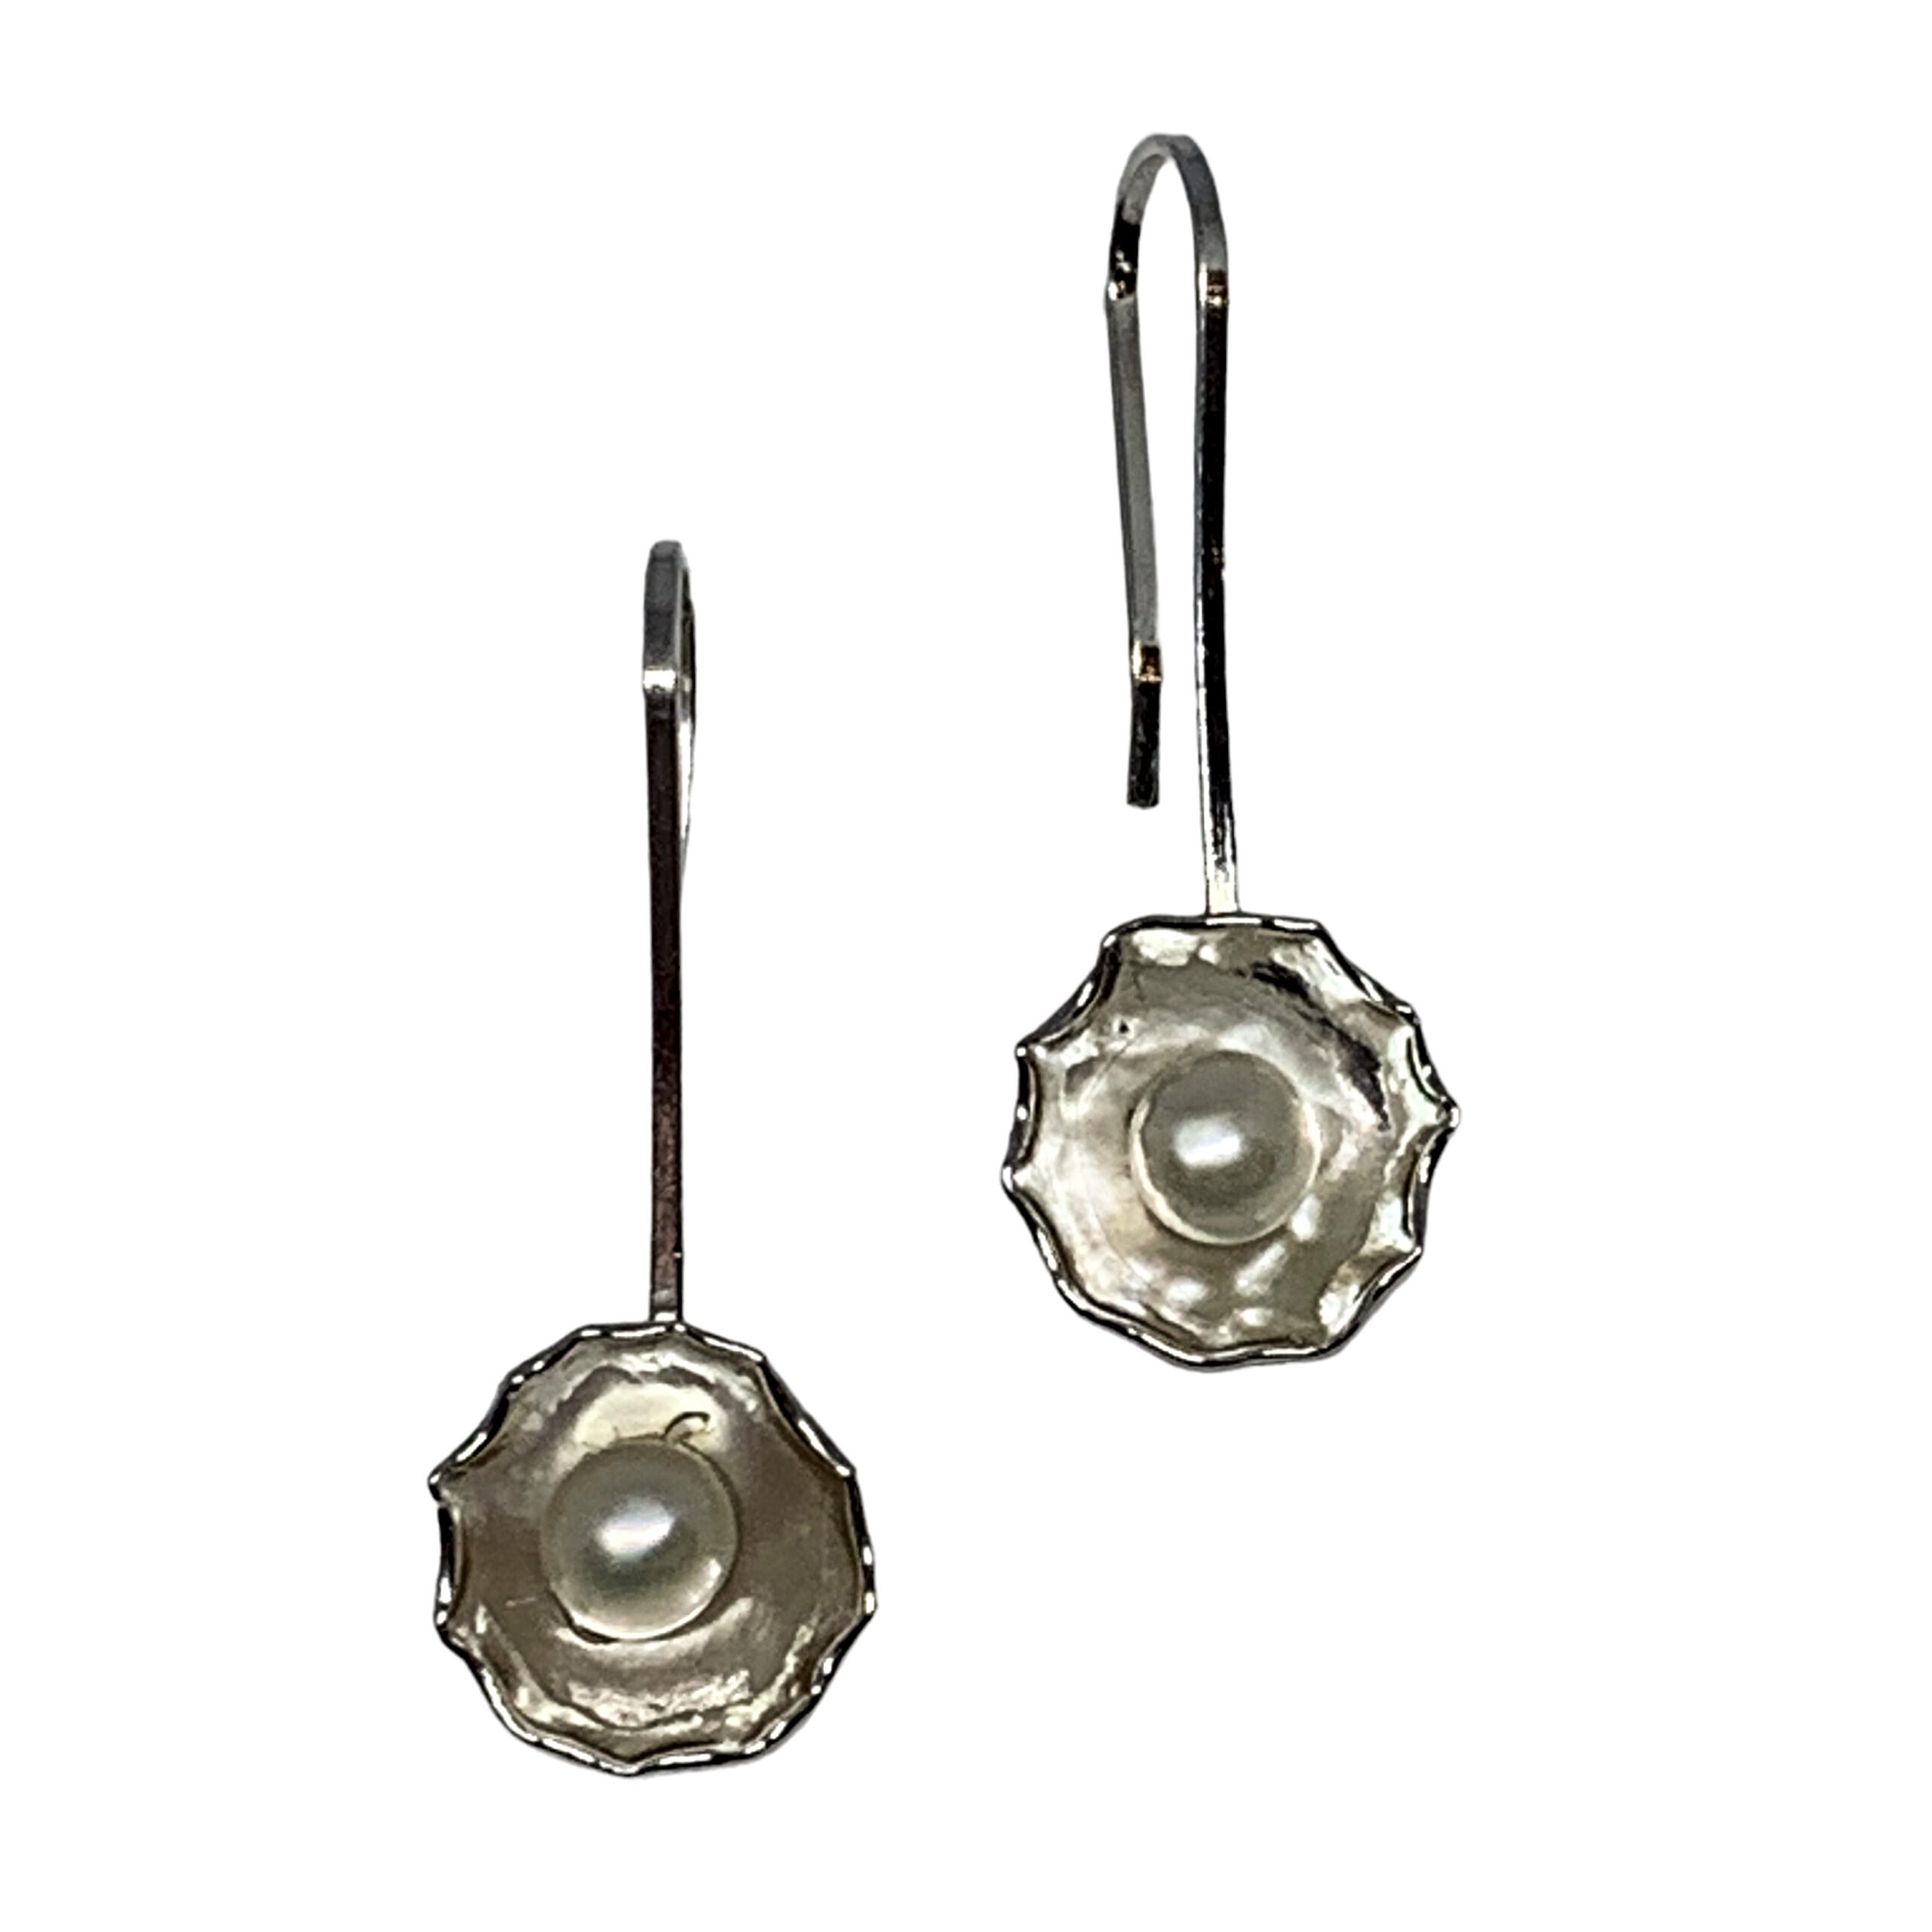 Handmade silver and pearl earrings by A&R Jewellery at Effusion Art Gallery in Invermere, BC.